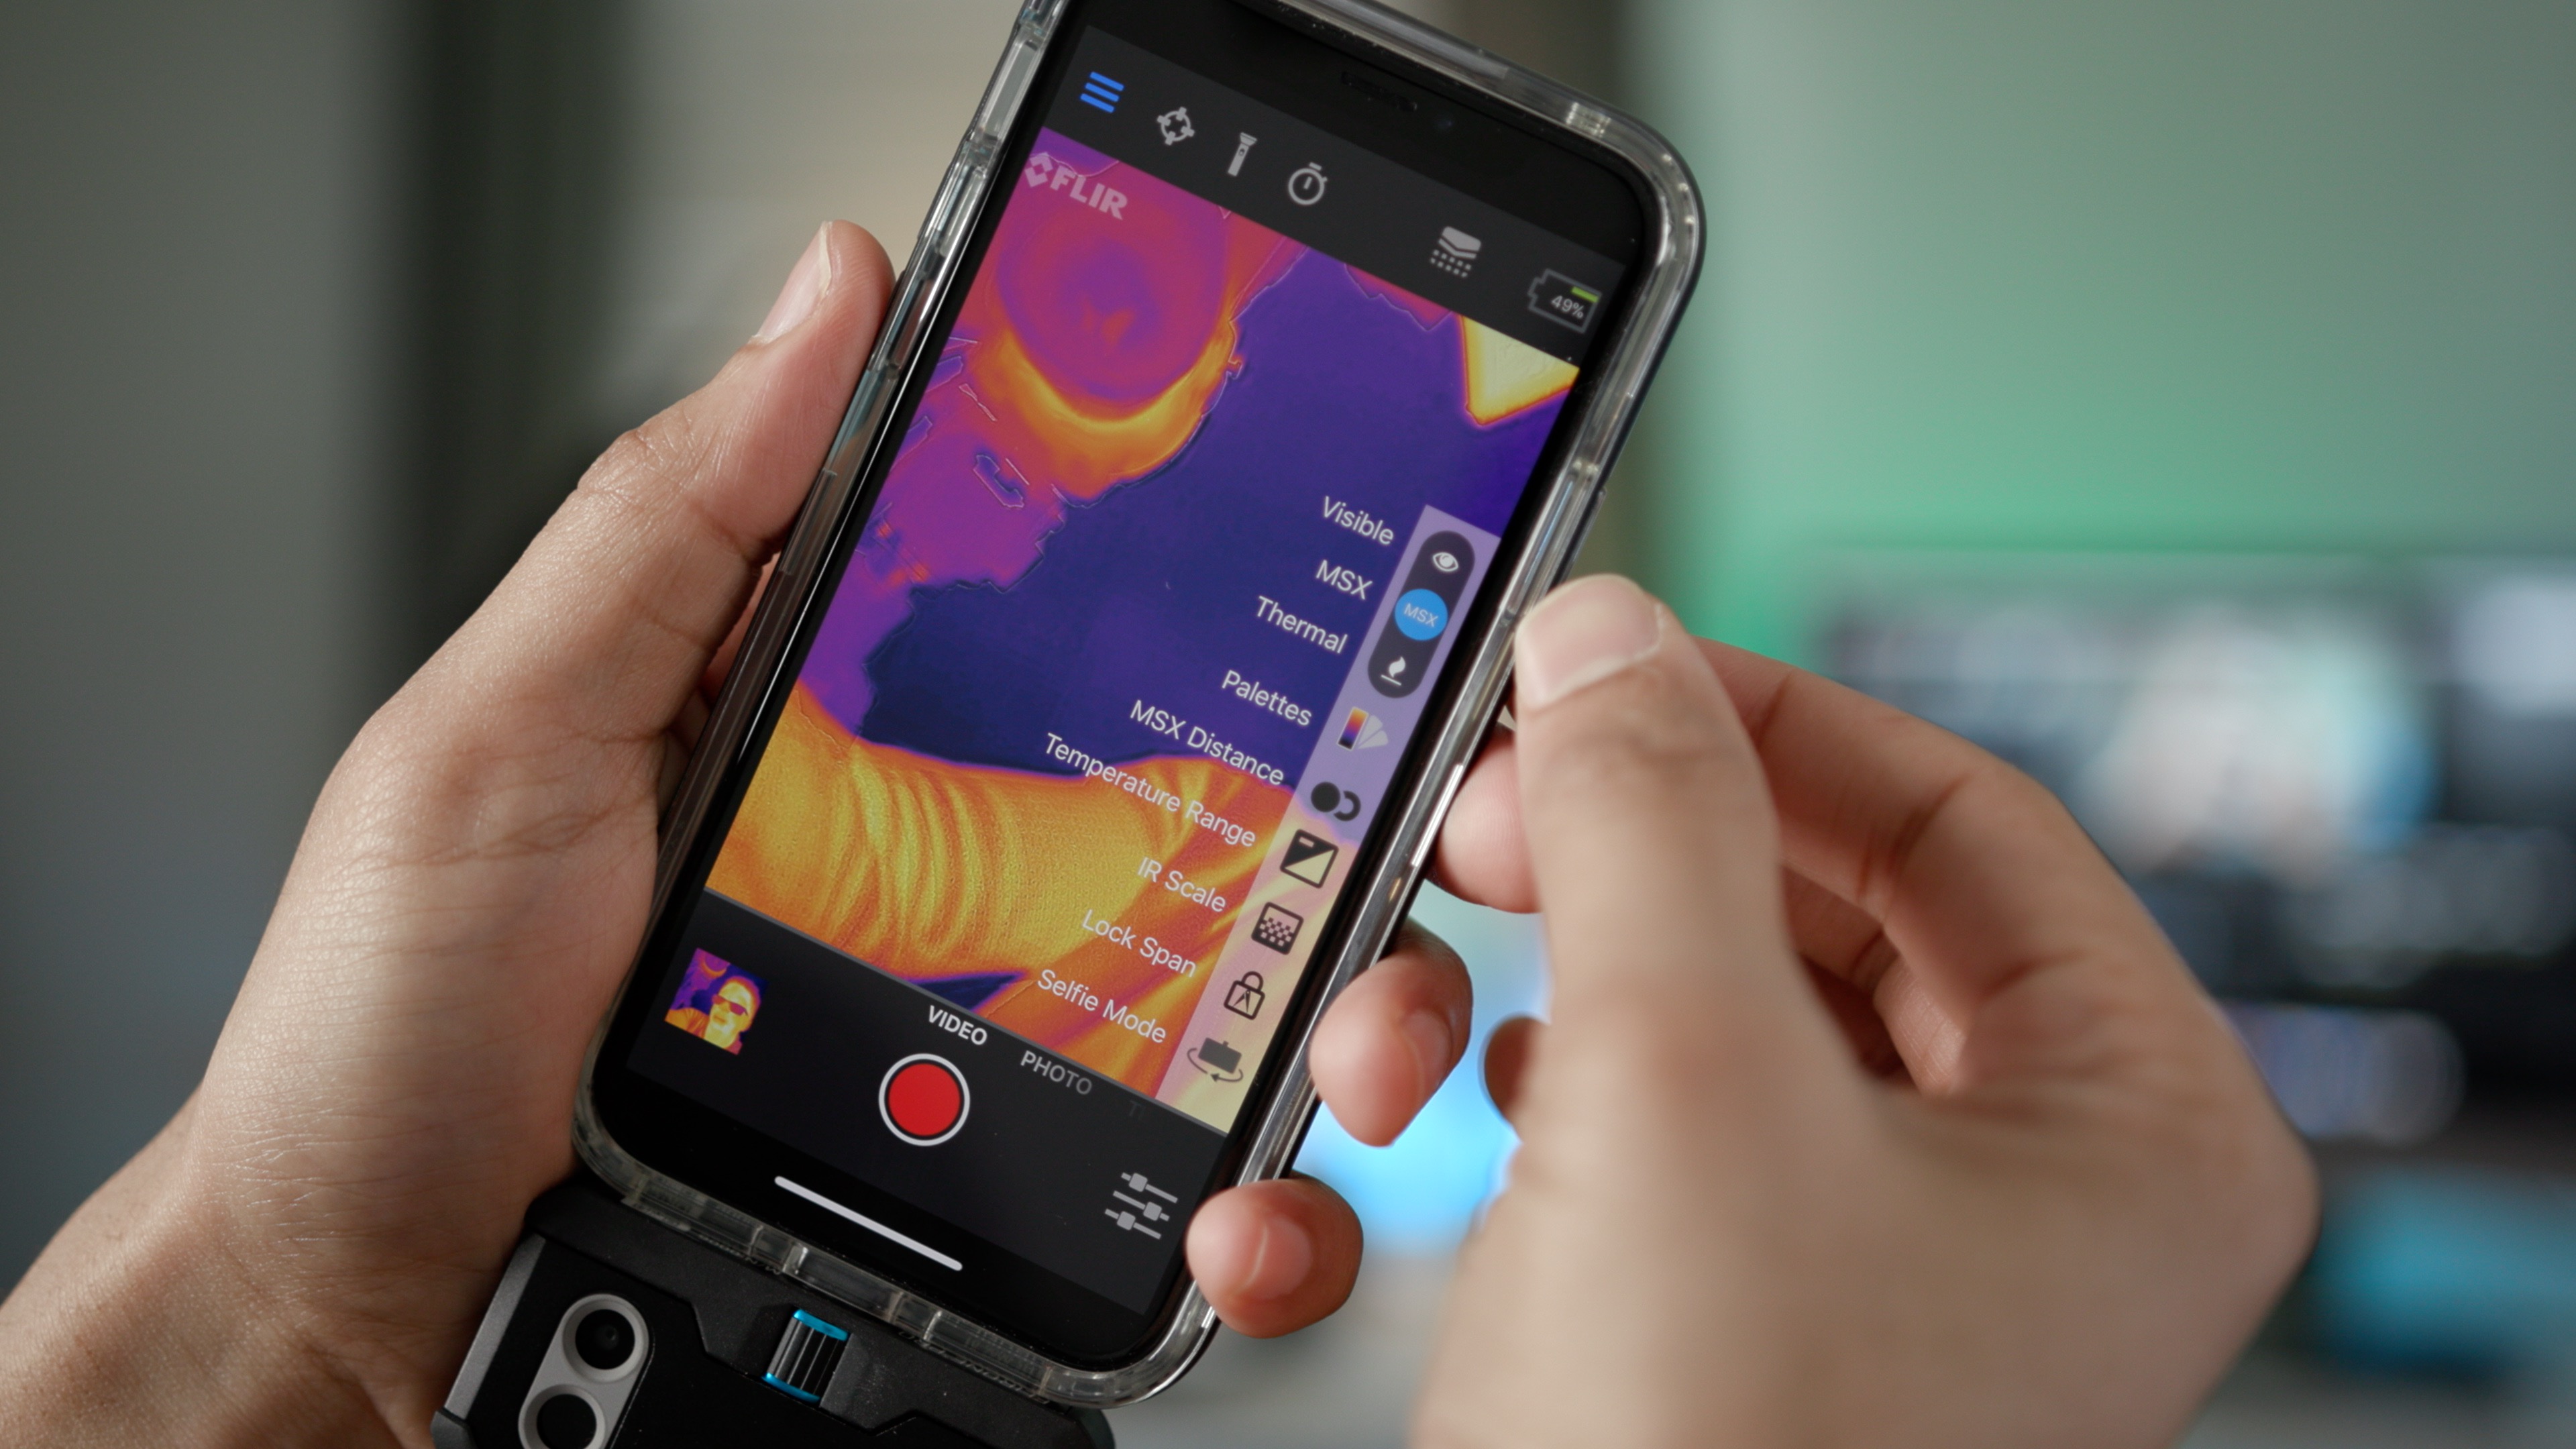 Hands-on: 'Flir One Pro' turns your iPhone into a thermal ...